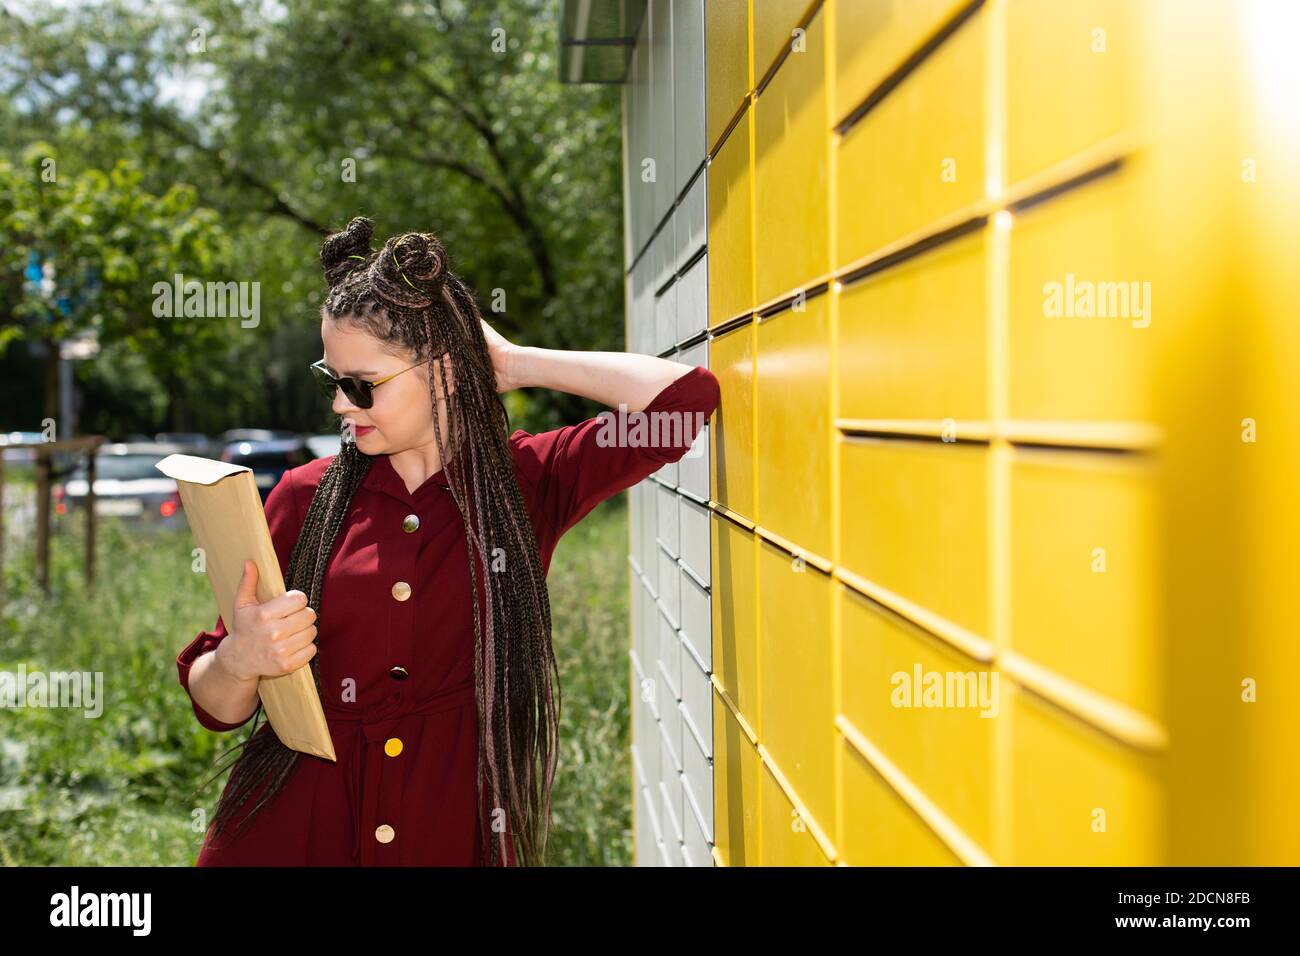 On an unusually sunny day in the summer, the girl went to collect a package from the neighborhood parcel warehouse and stands reading from whom she received it. Stock Photo